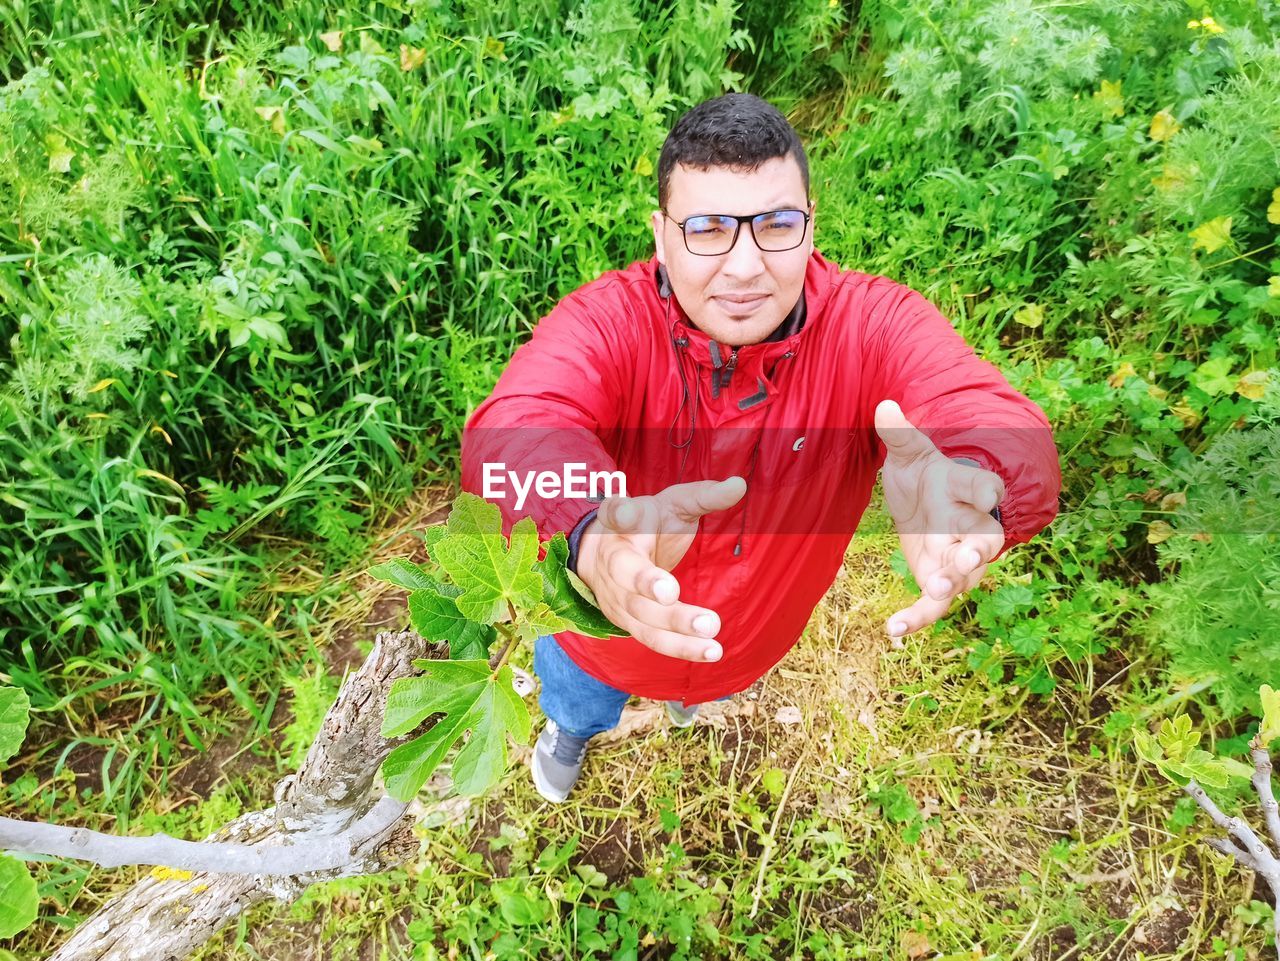 plant, one person, glasses, men, nature, grass, adult, eyeglasses, lifestyles, green, leisure activity, land, portrait, looking at camera, front view, casual clothing, day, growth, young adult, field, outdoors, red, flower, smiling, high angle view, full length, agriculture, sitting, natural environment, forest